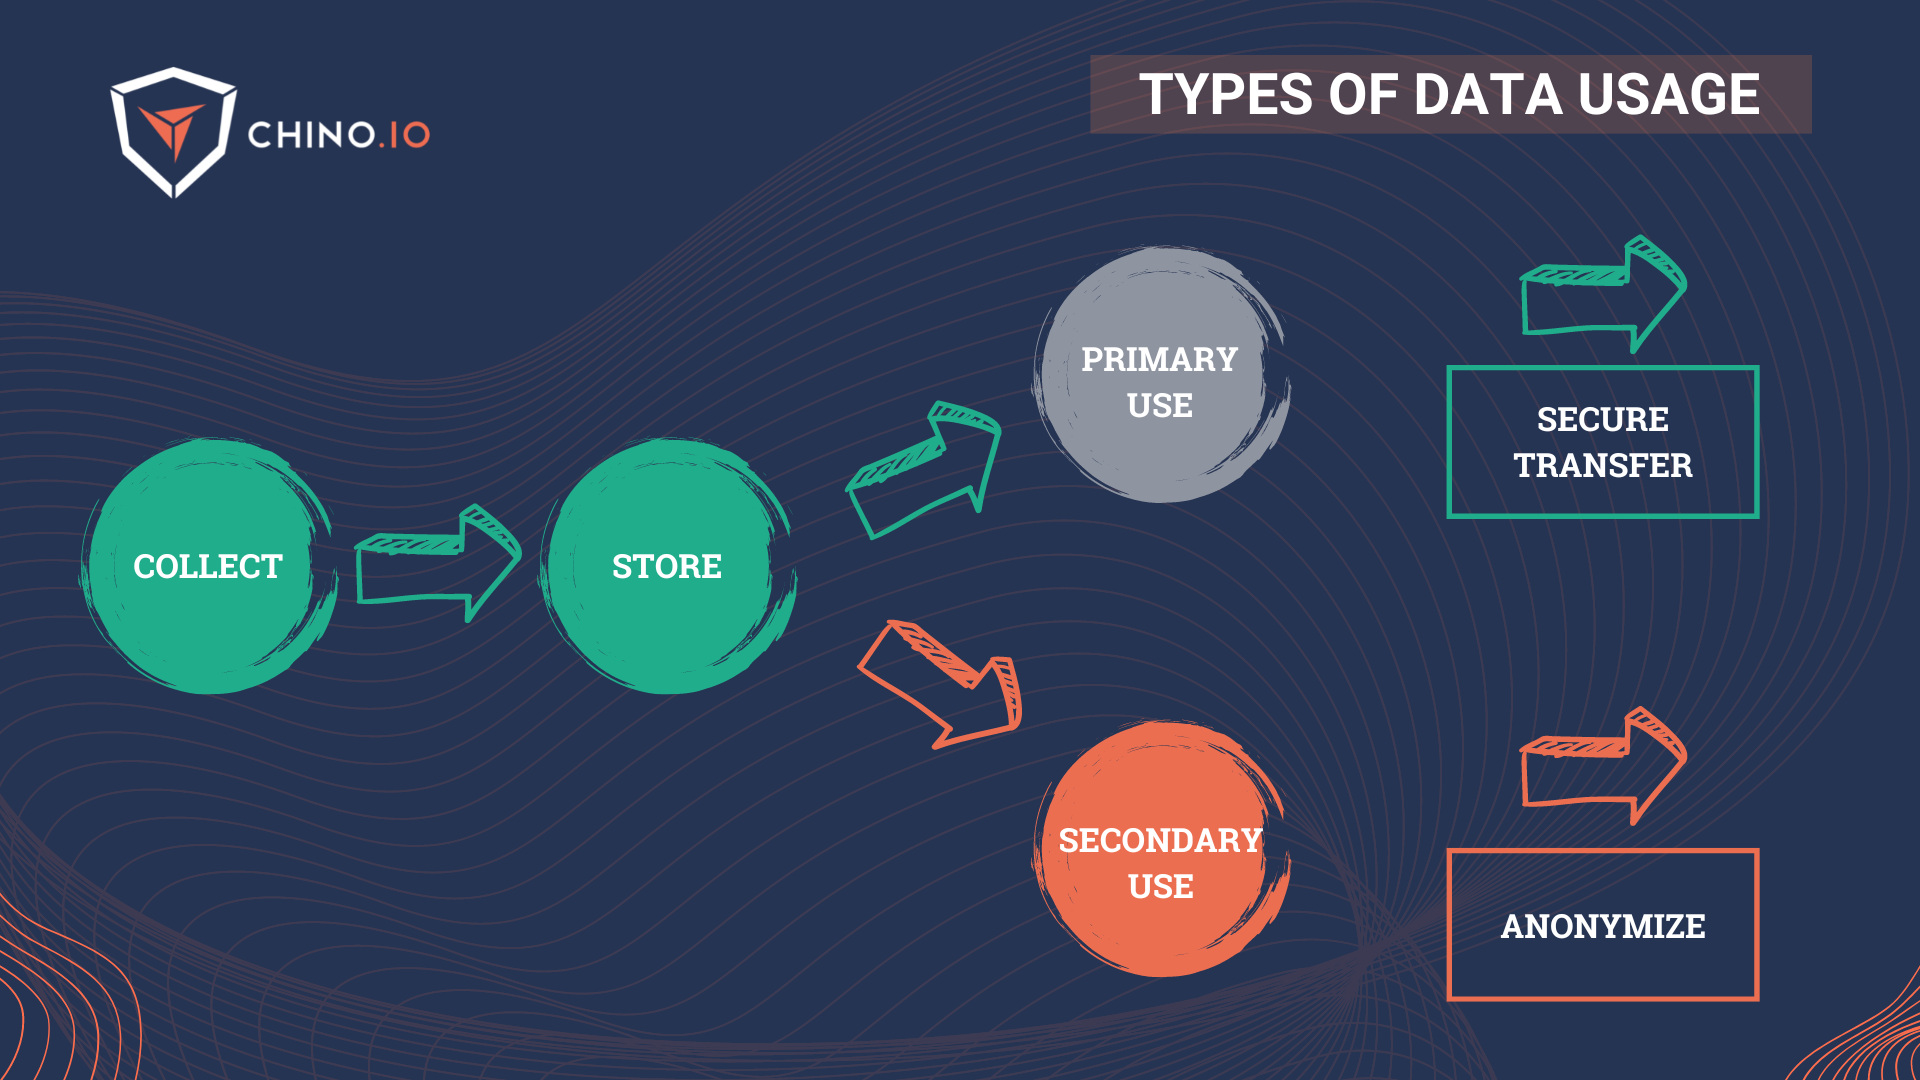 Types of data usage with primary and secondary use explained 